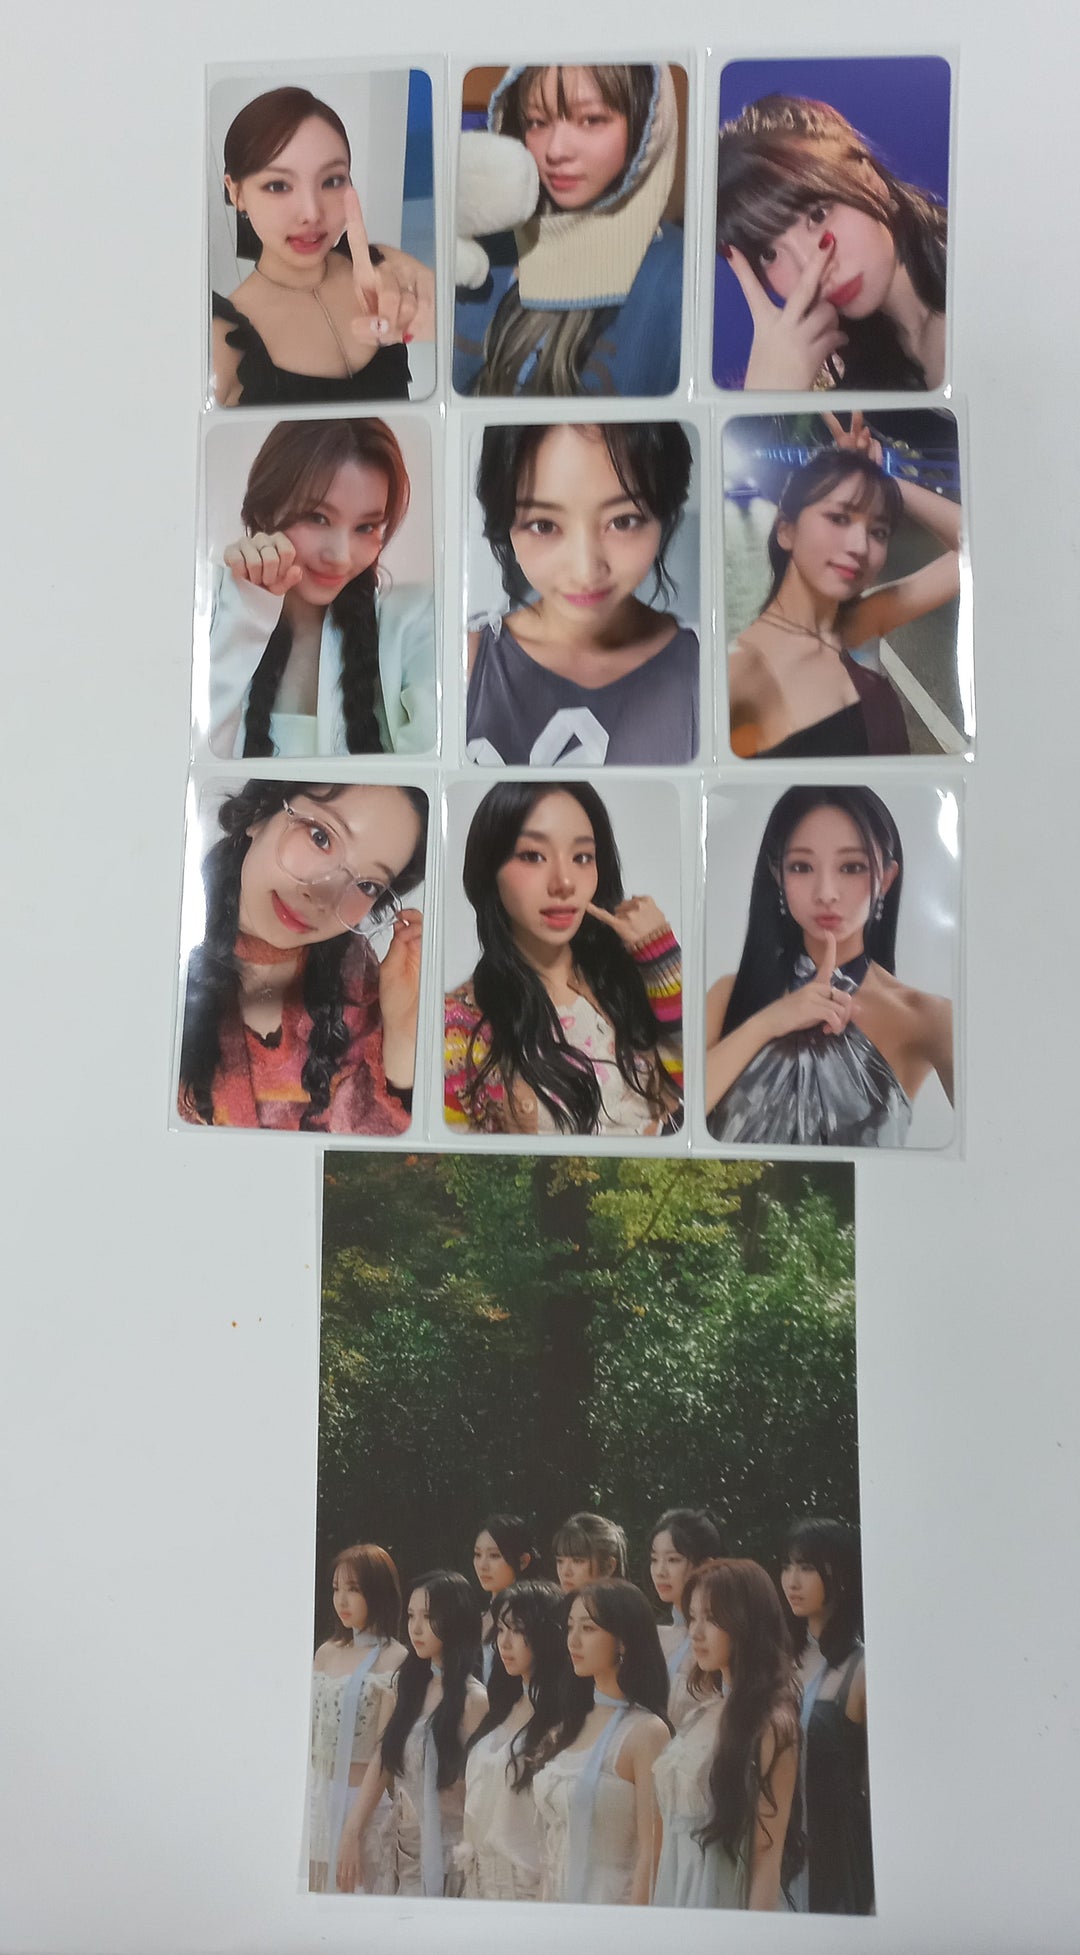 TWICE "With YOU-th" Mini 13th - Withmuu Pre-Order Benefit Photocard [Digipack Ver.] [24.2.27]